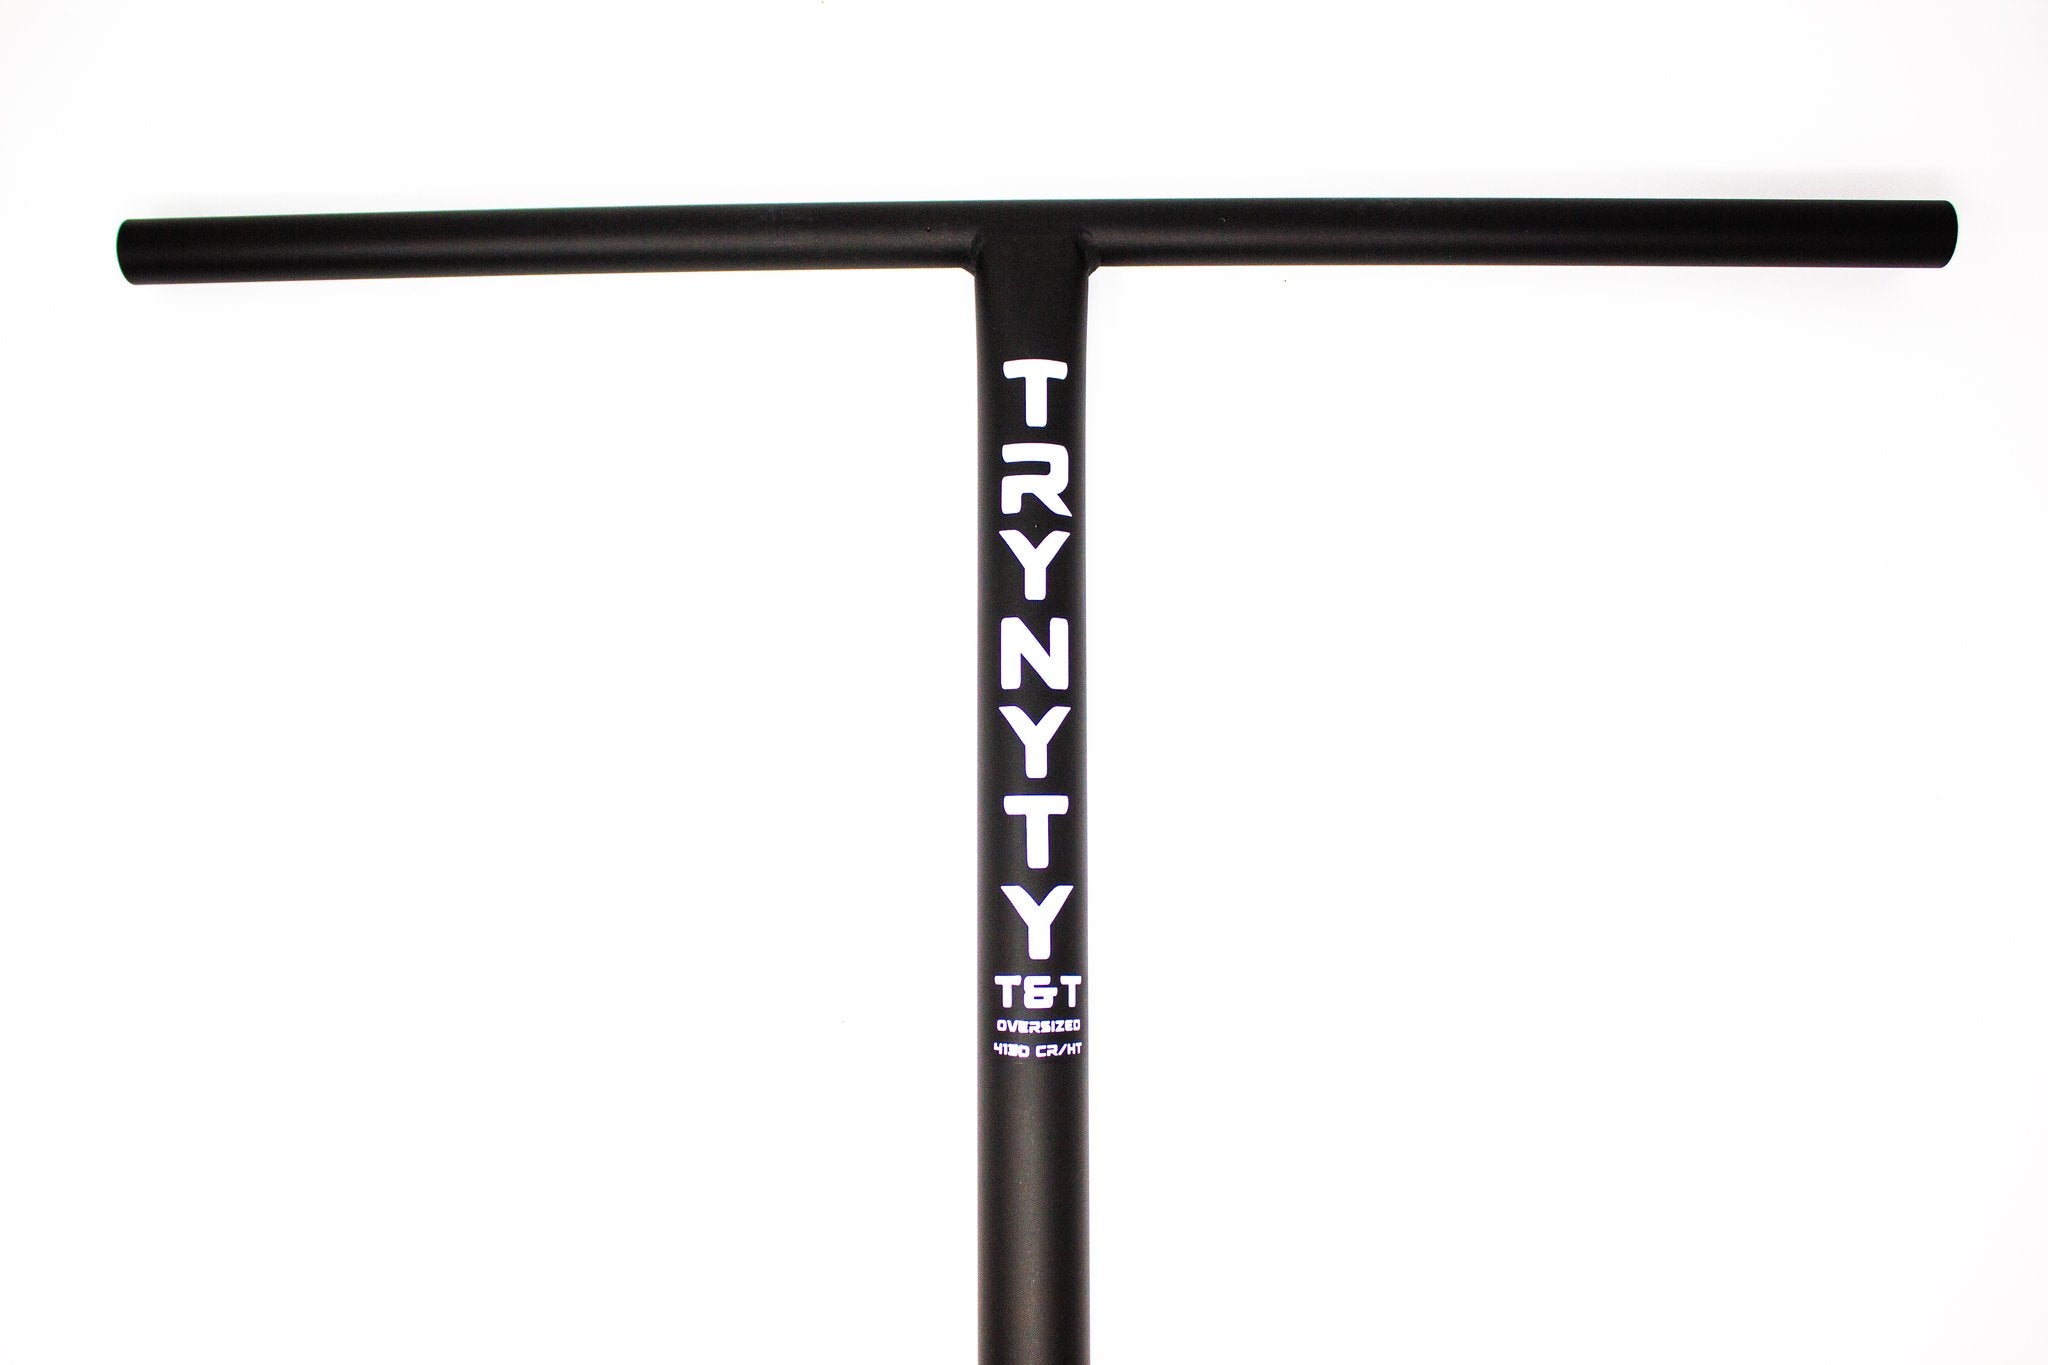 TRYNYTY Oversized T&T Bars (Tried & True)